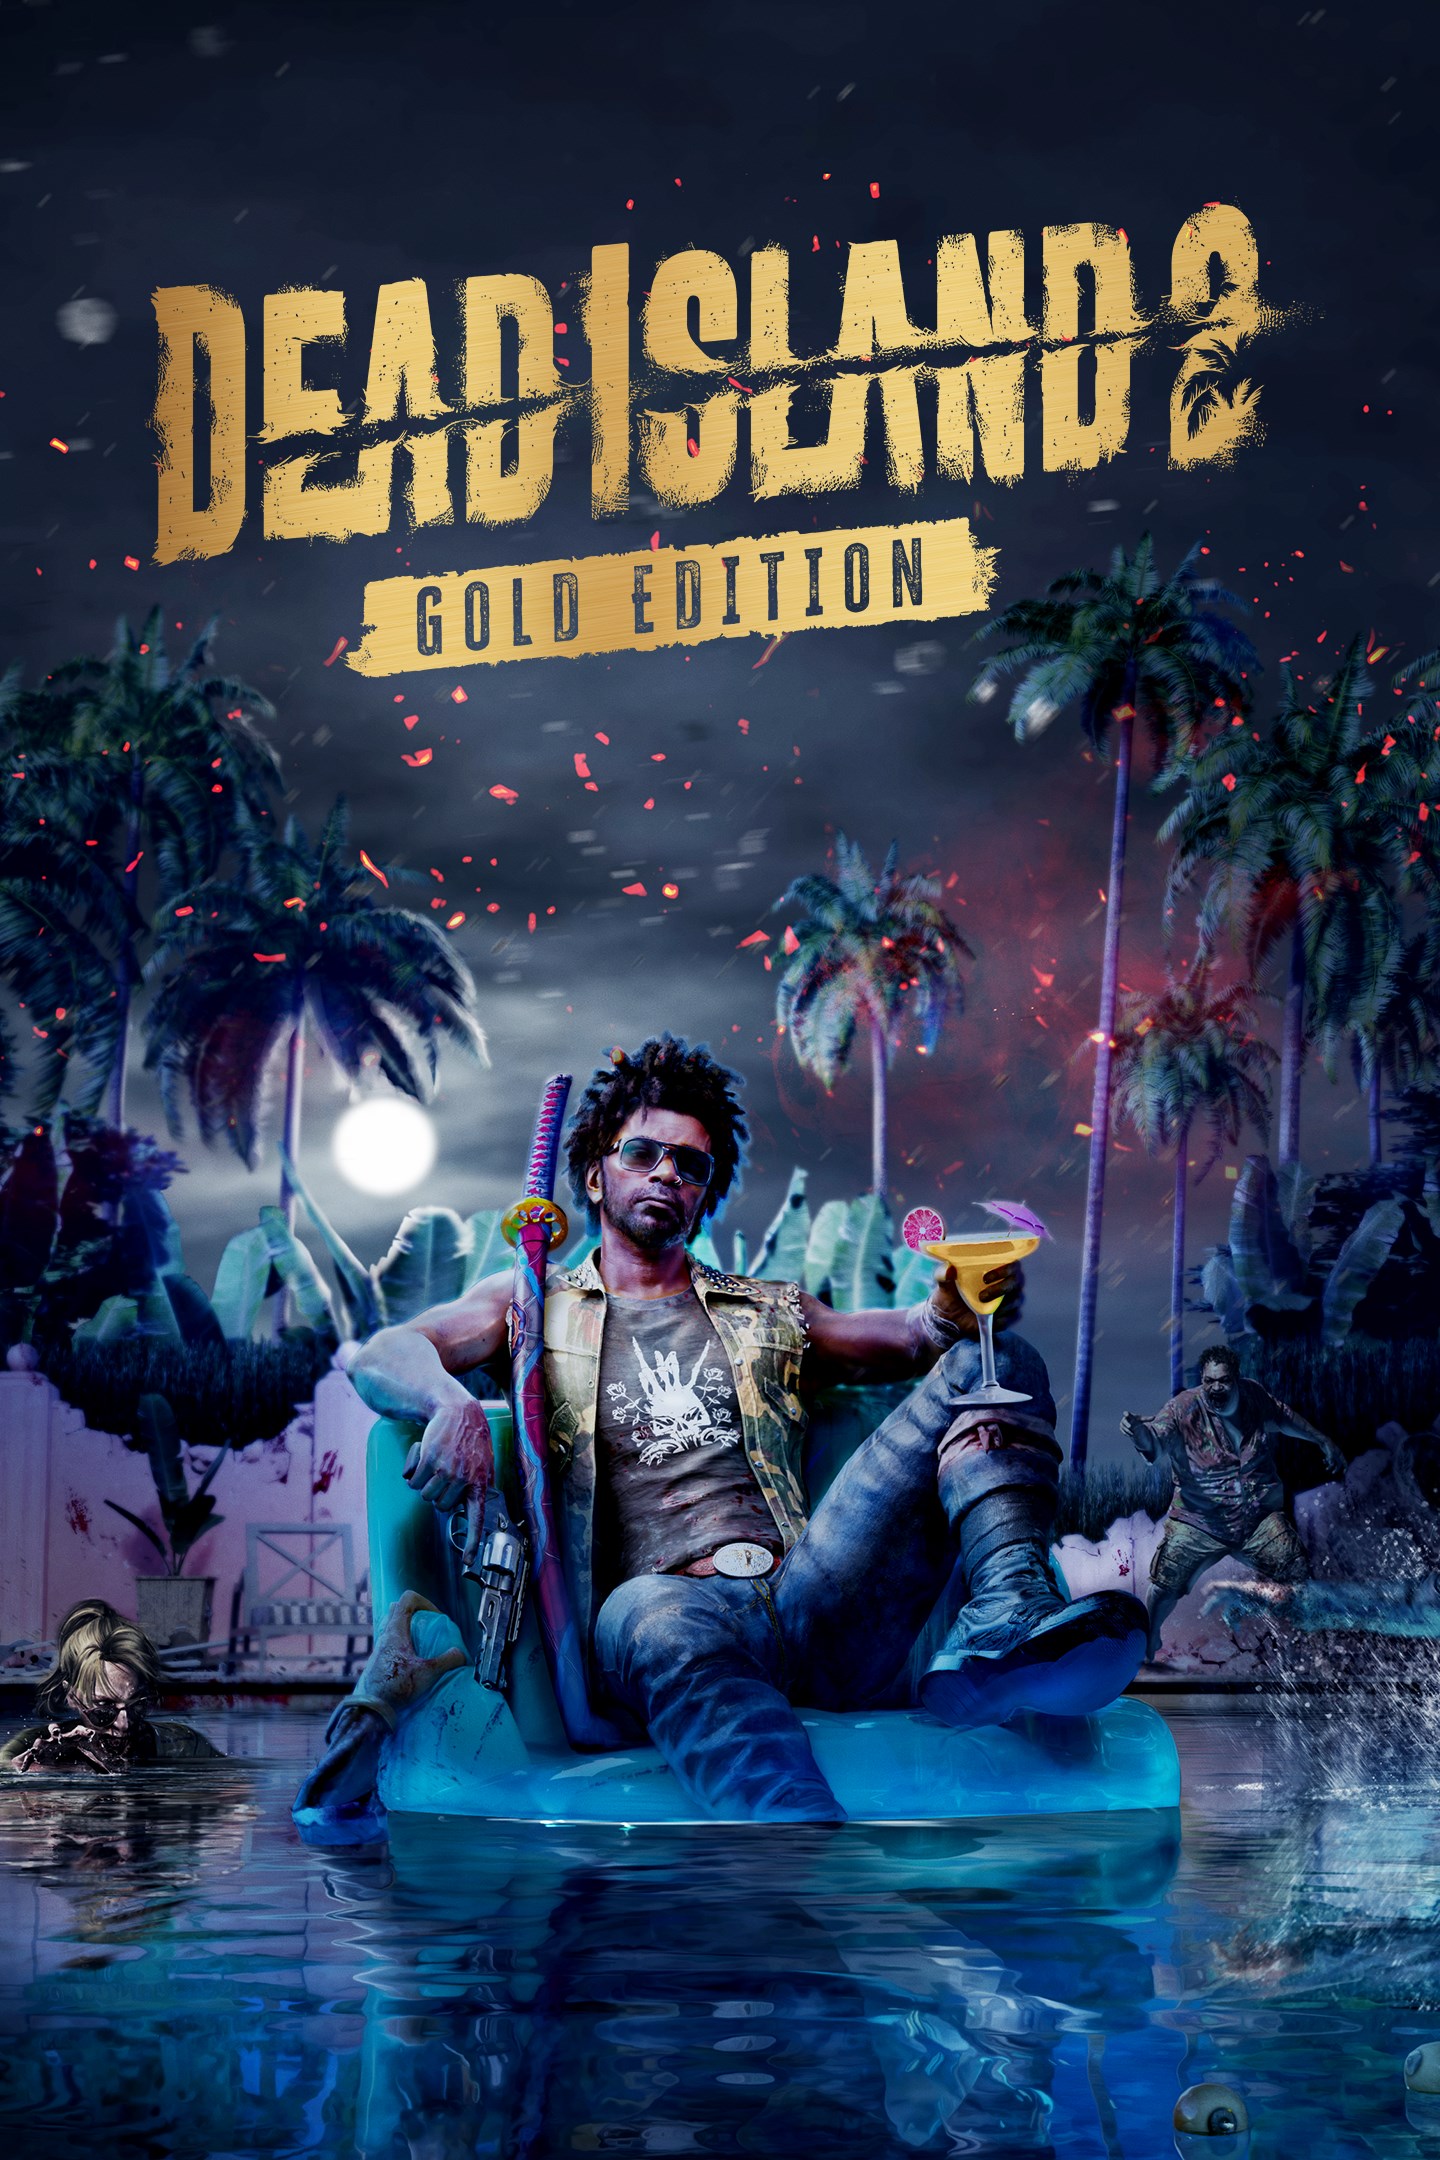 buy-dead-island-2-gold-edition-xbox-cheap-from-1982-rub-xbox-now